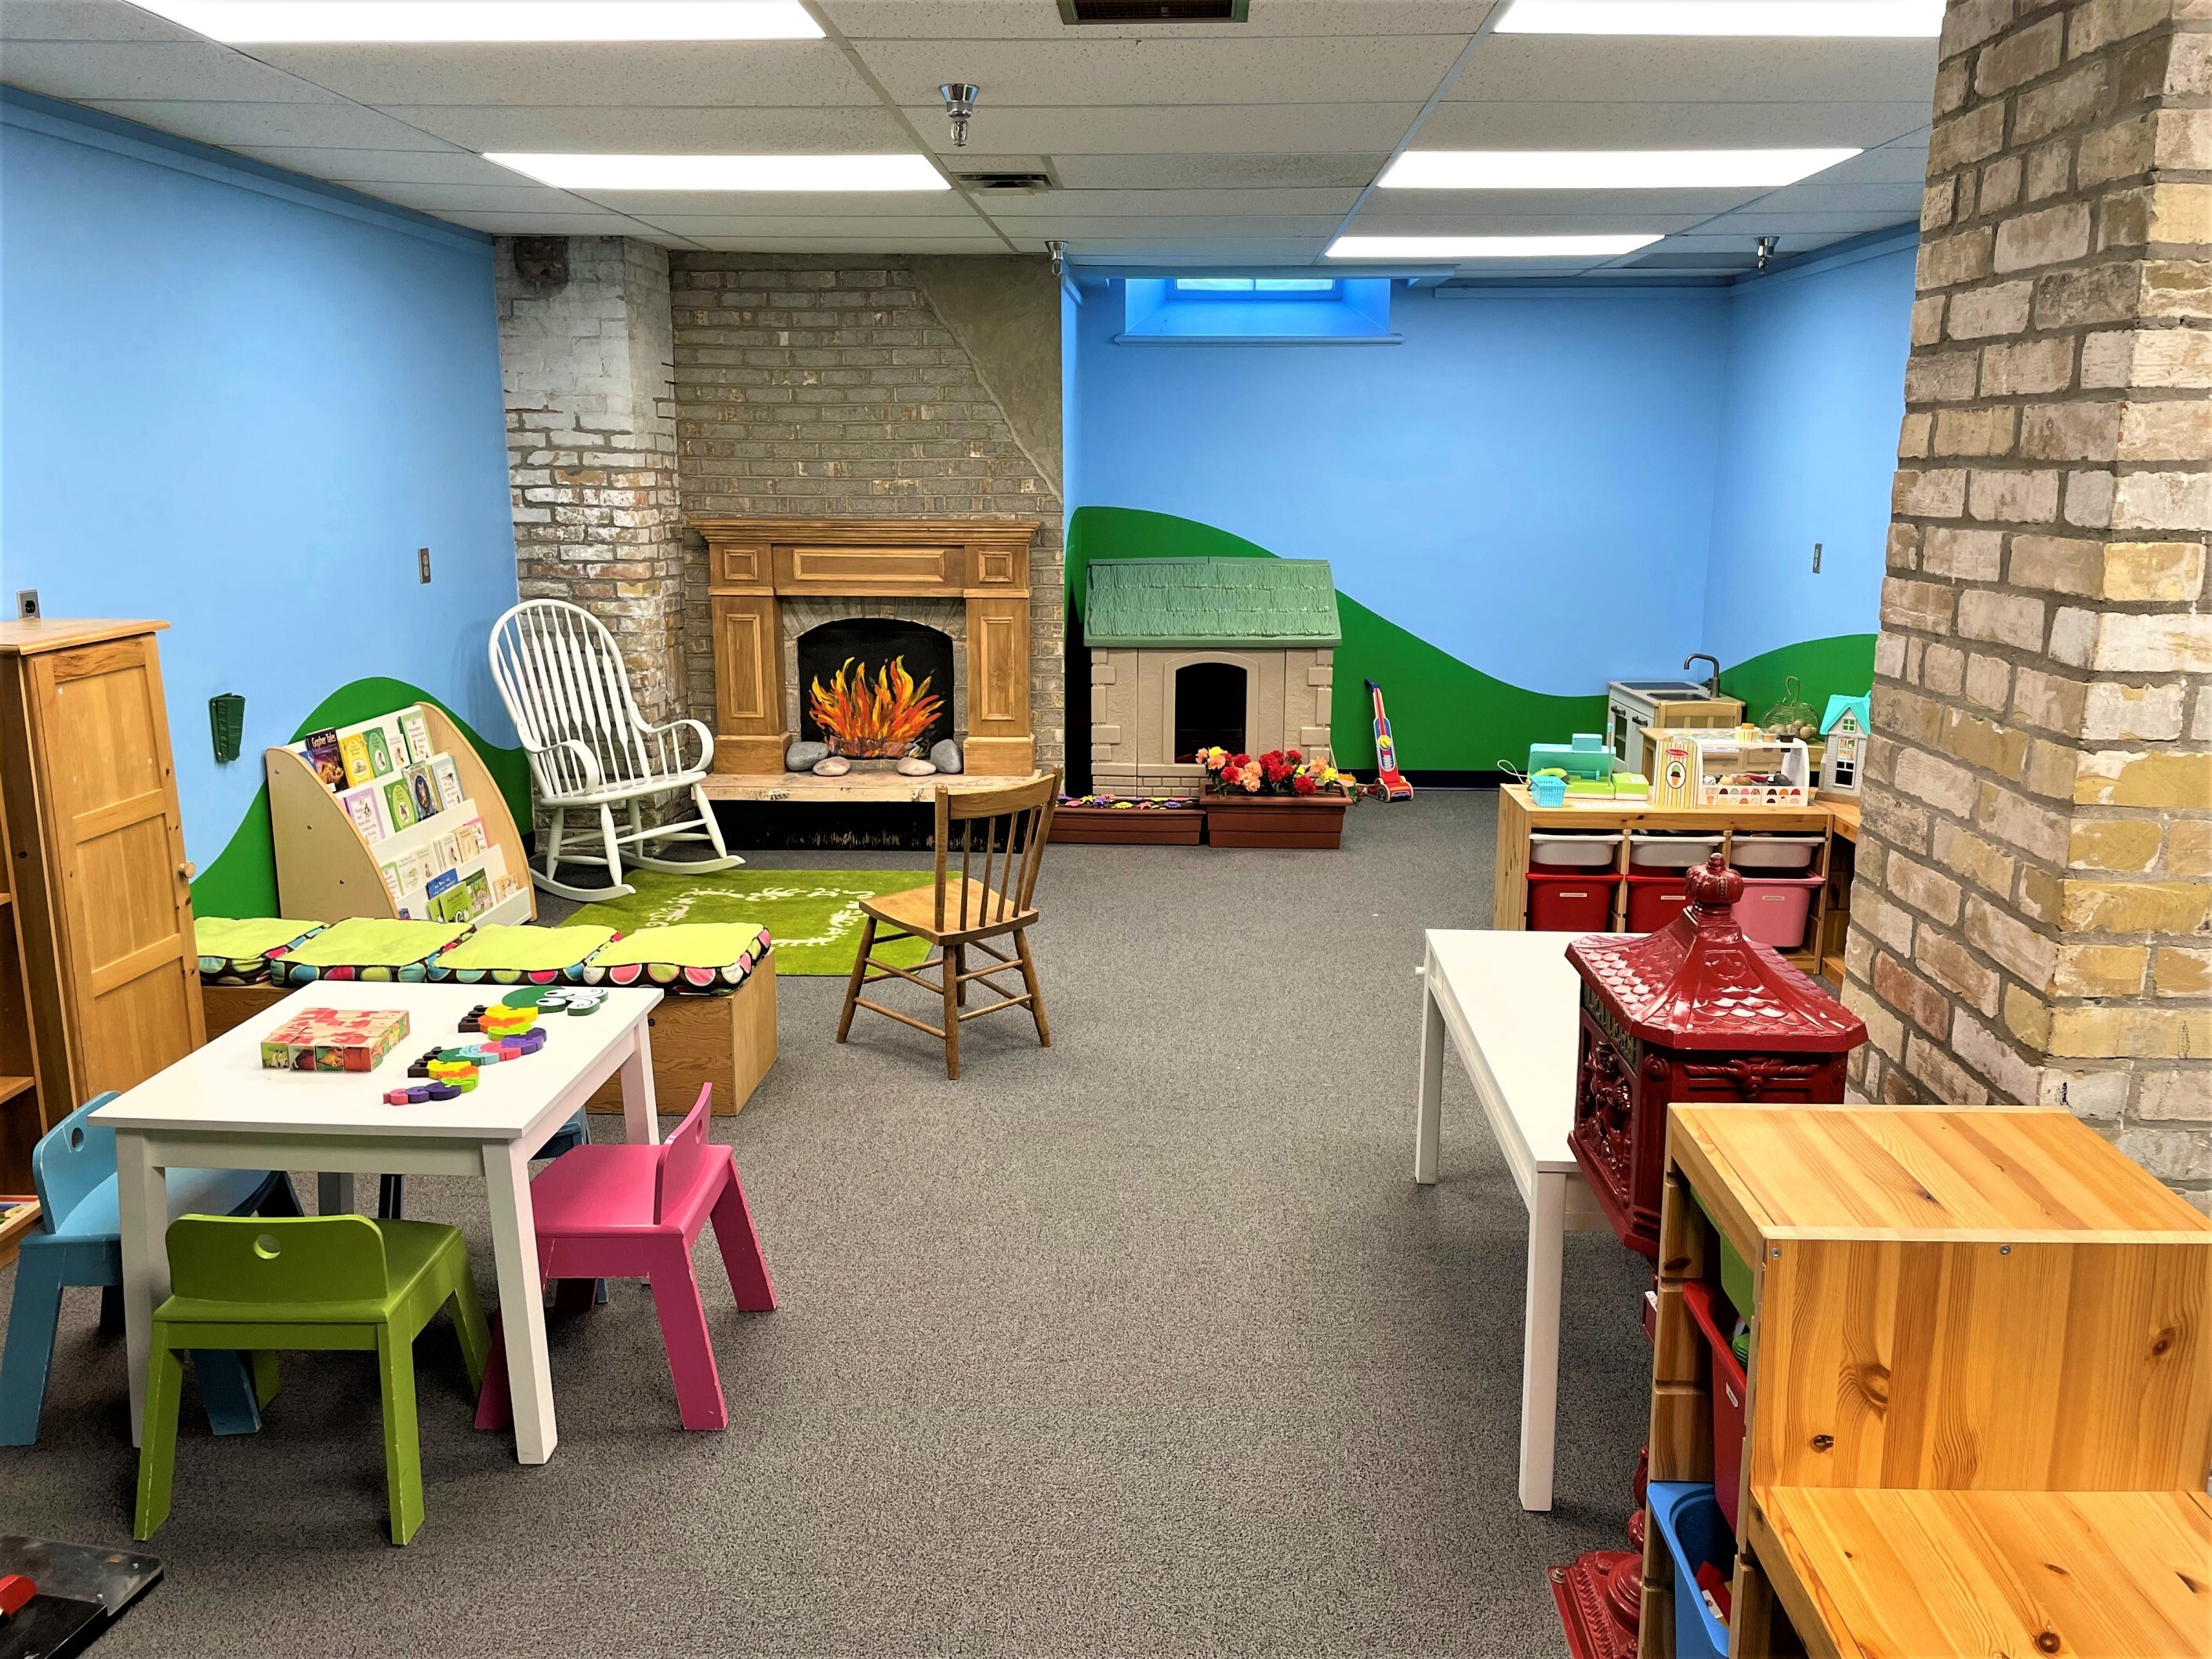 A room set up for young children to play with a rocking chair, a toy house, books, puzzles, etc.